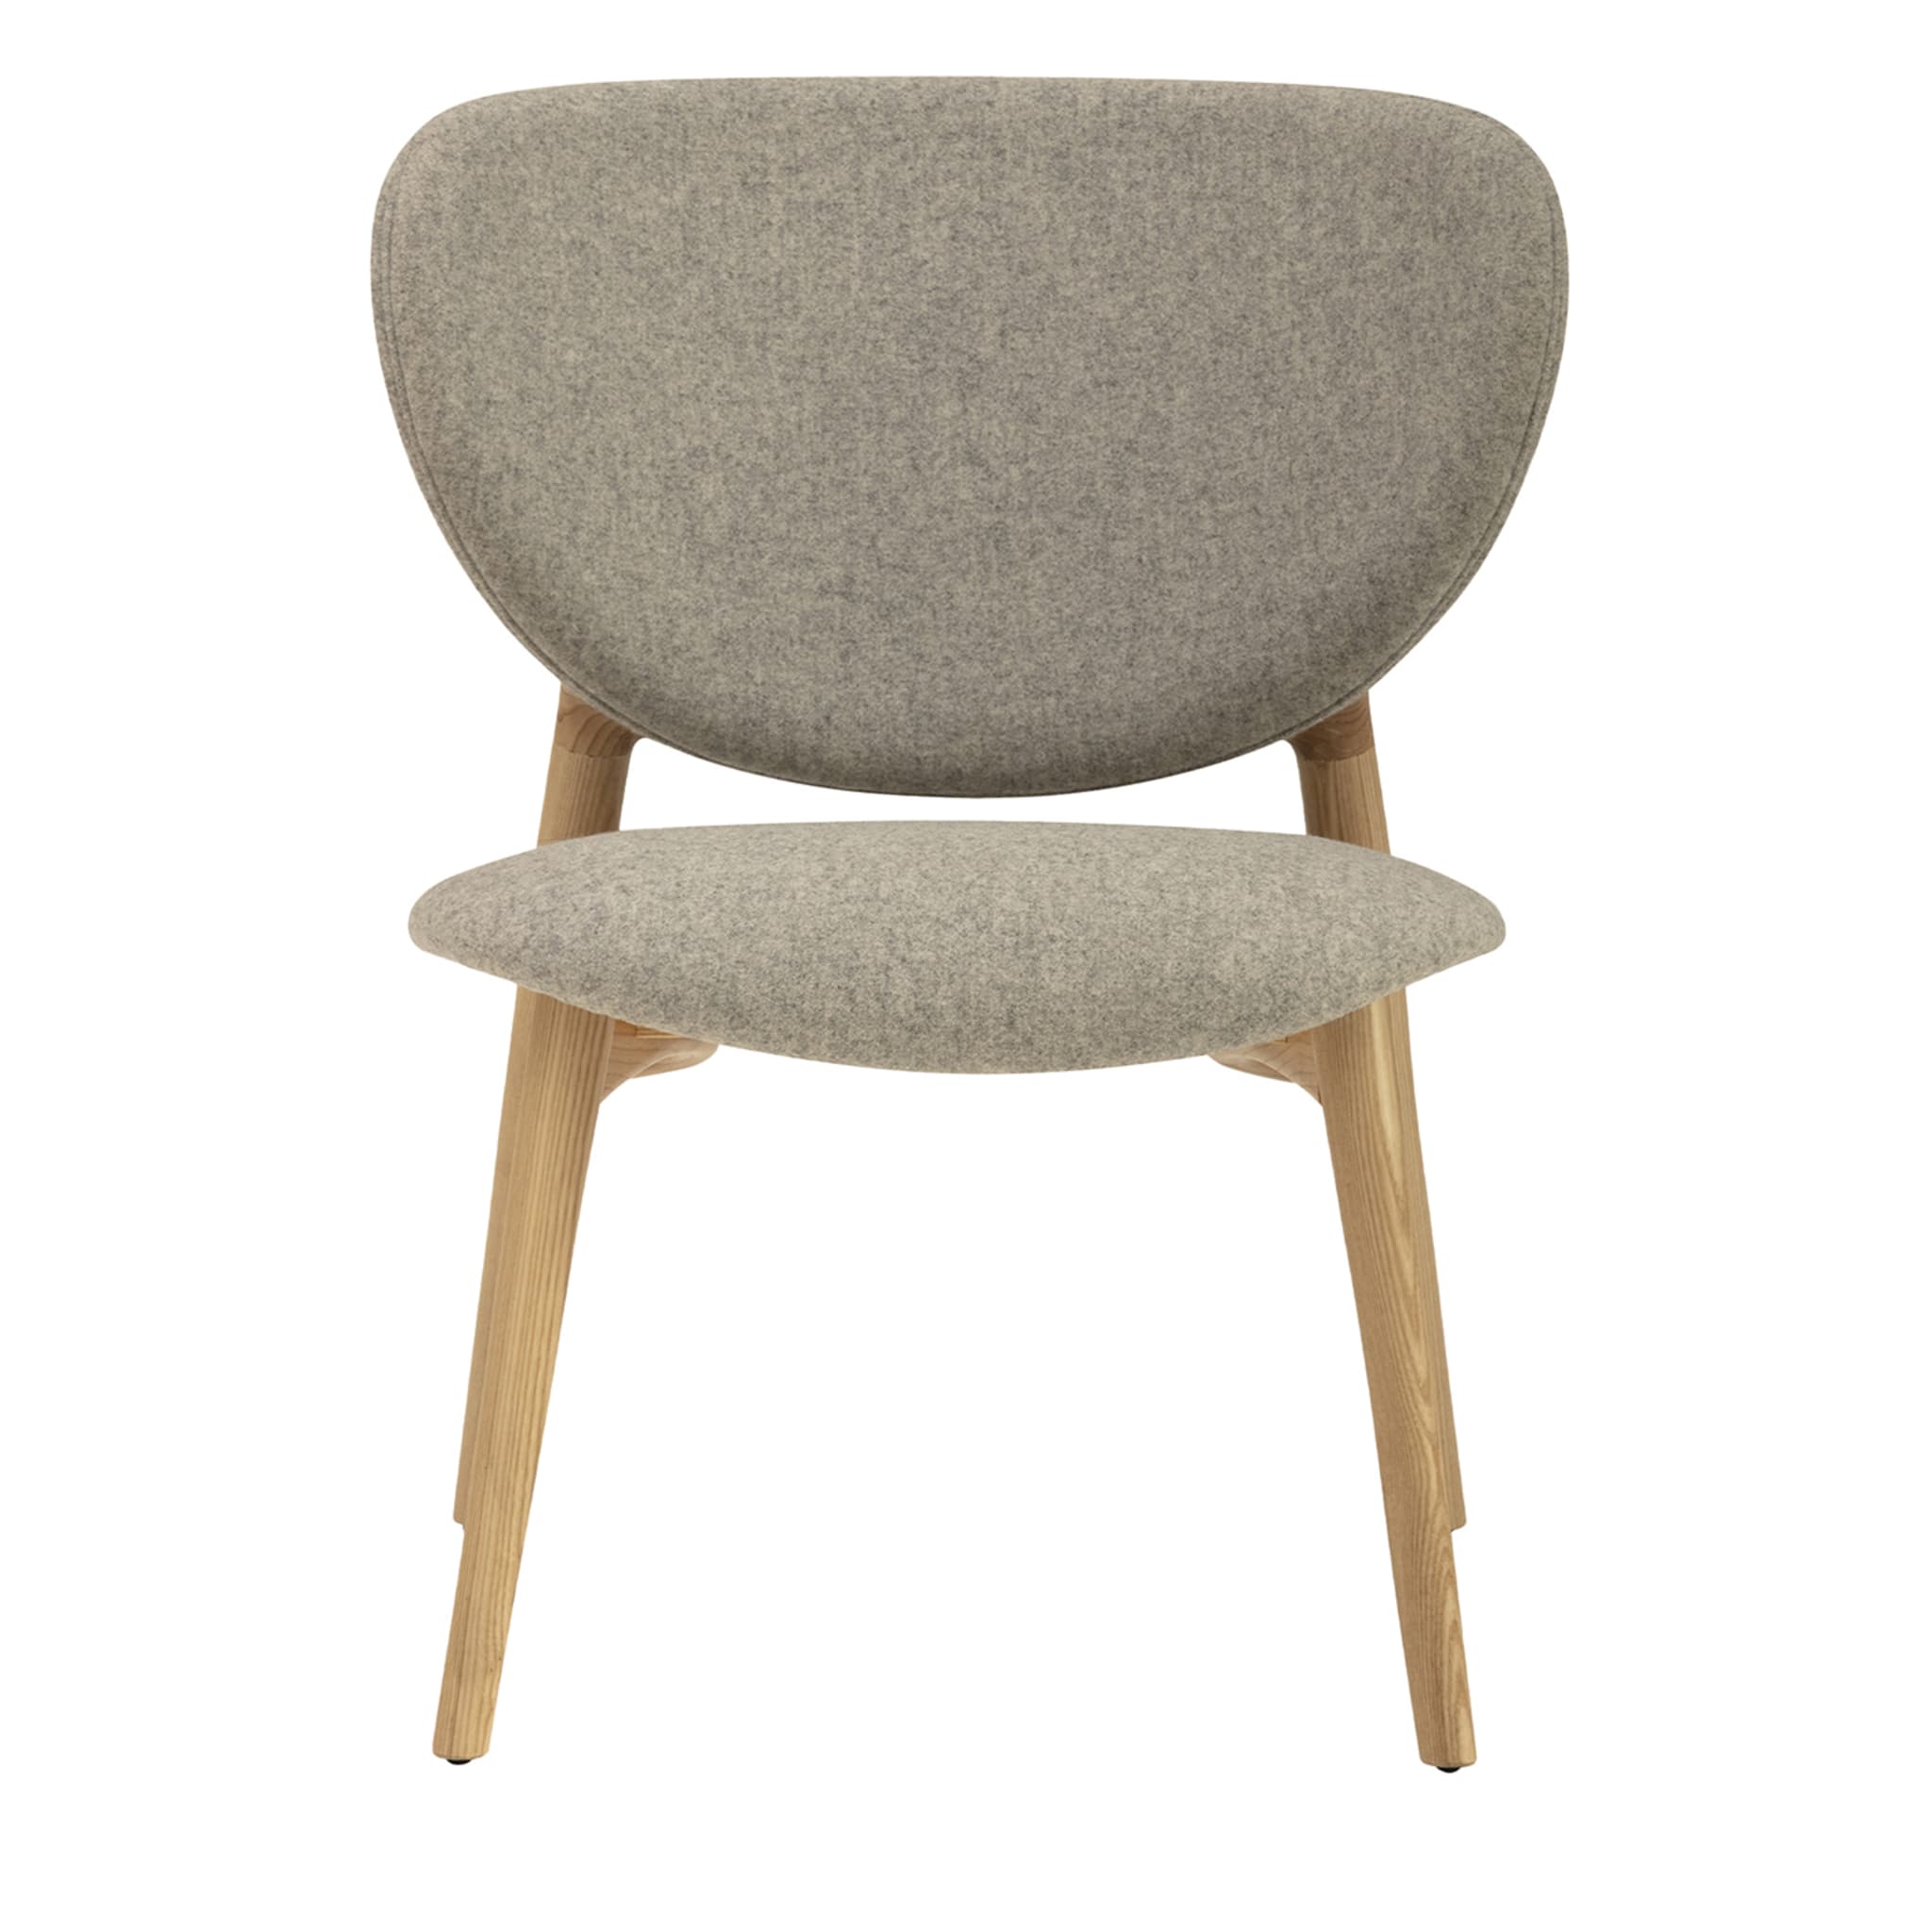 Fleuron 203 Gray & Natural Ash Lounge Chair by Constance Guisset - Main view